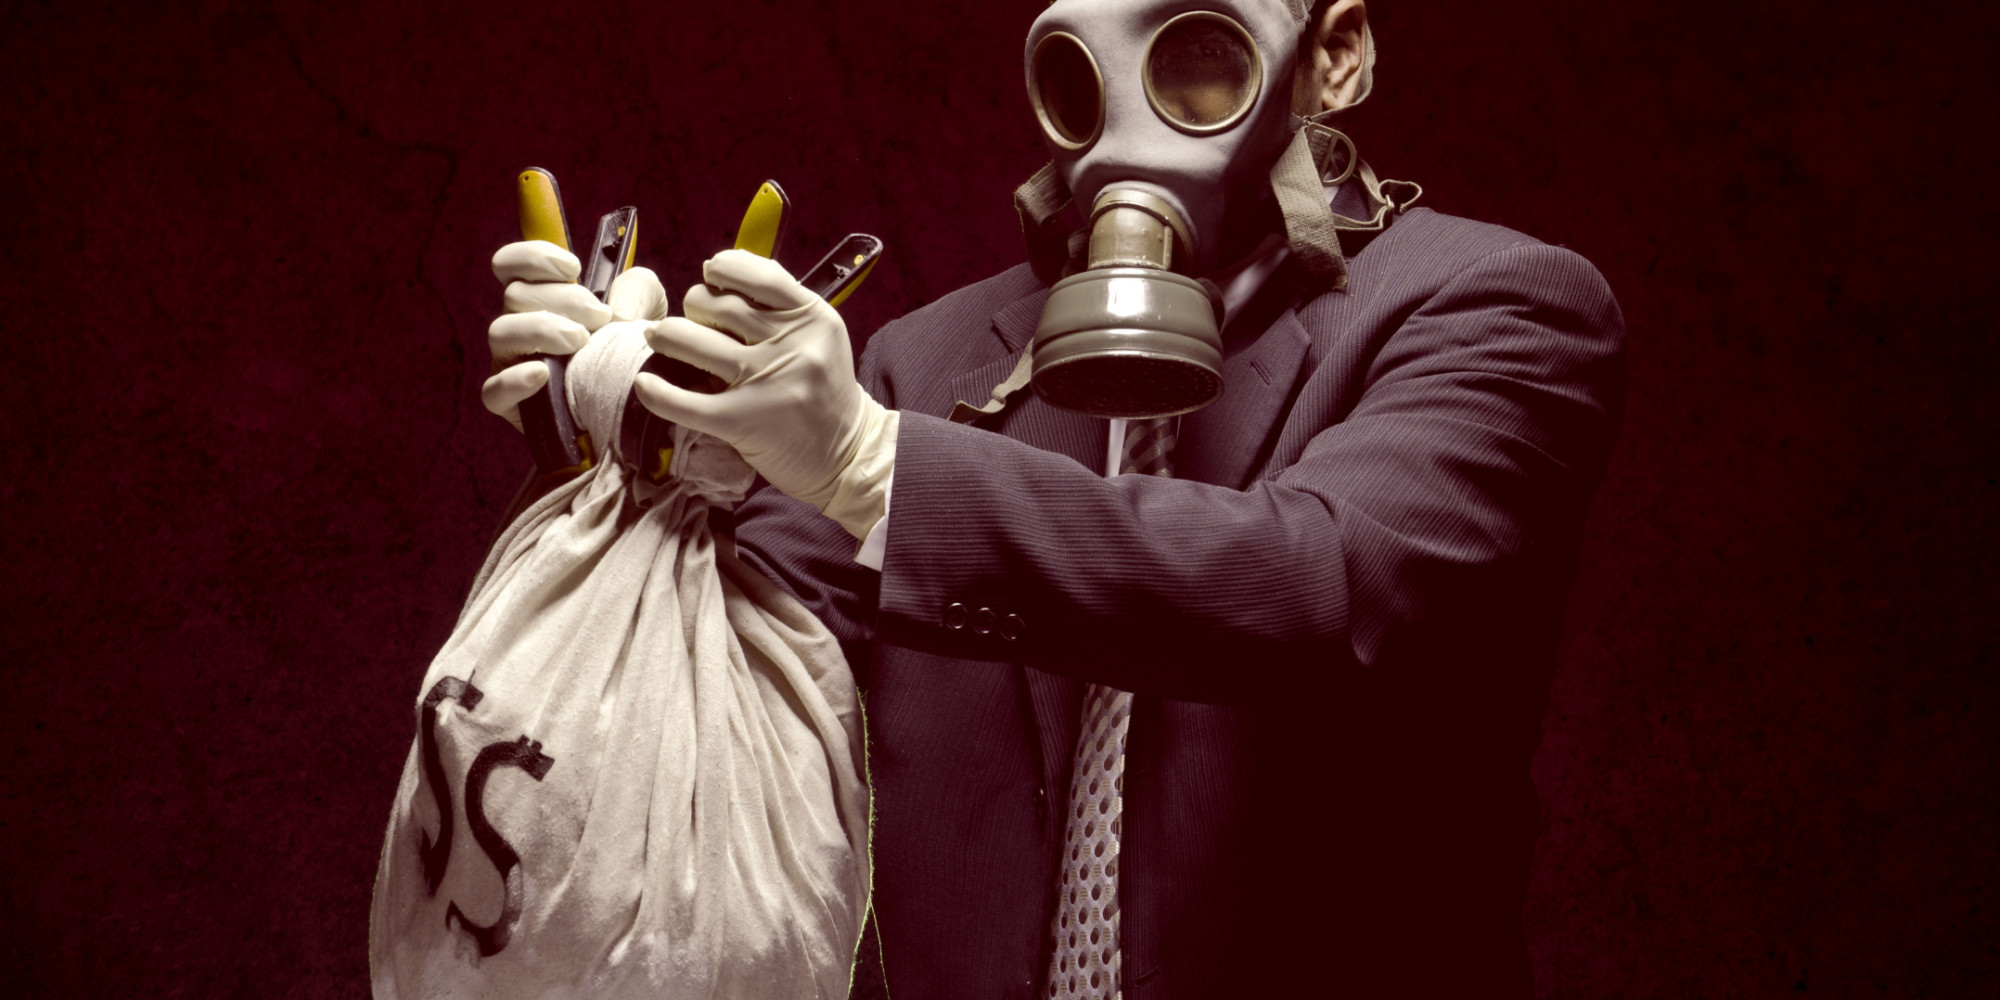 6 Toxic Thoughts Smart People Quarantine | HuffPost